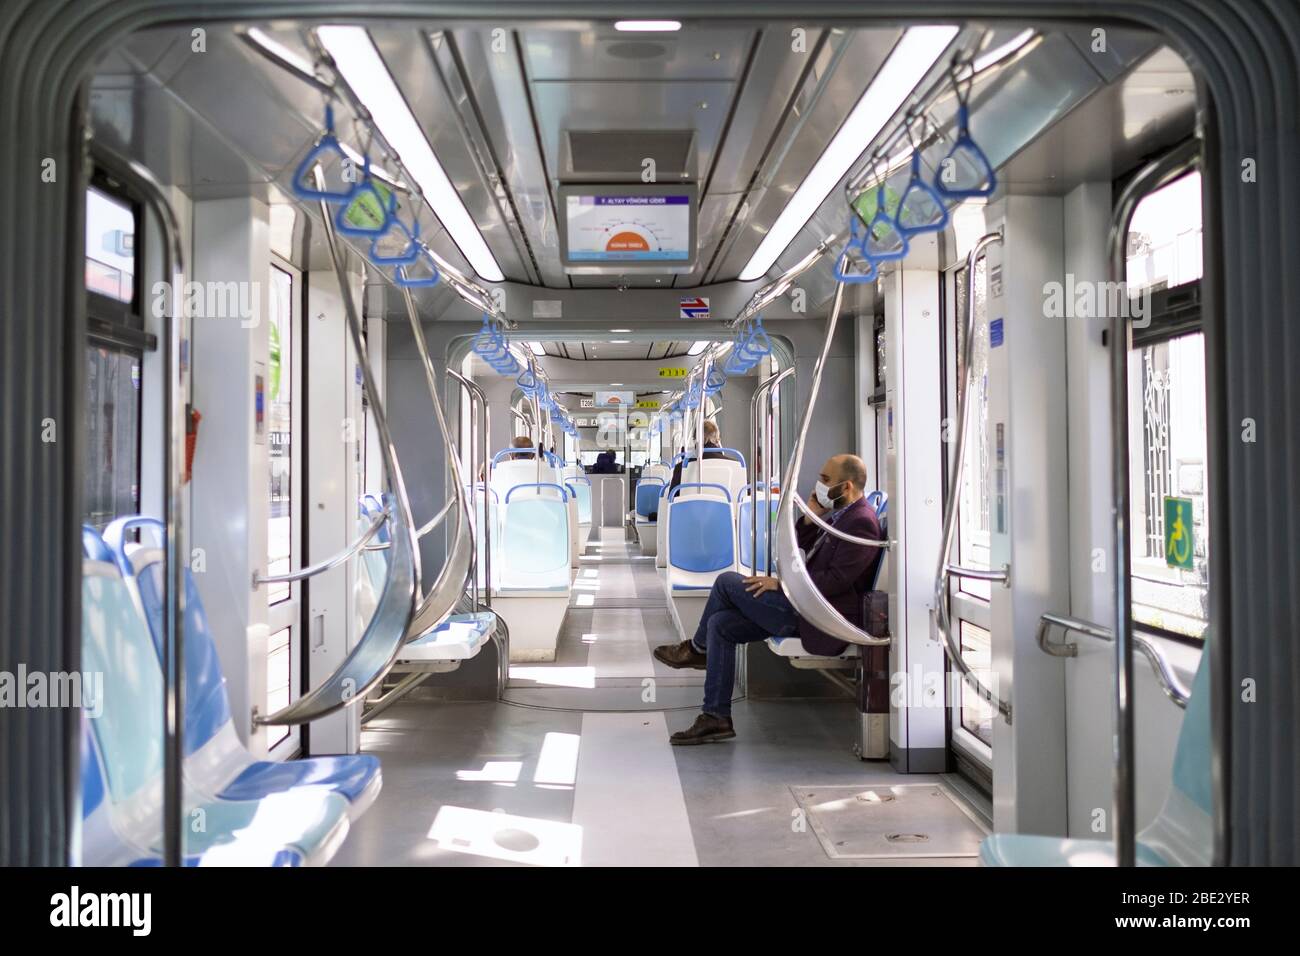 Izmir, Turkey - April 10, 2020:  Inside of Izmir Tram, Only a few people is transporting with it because of coronavirus pandemi quarentine. Stock Photo